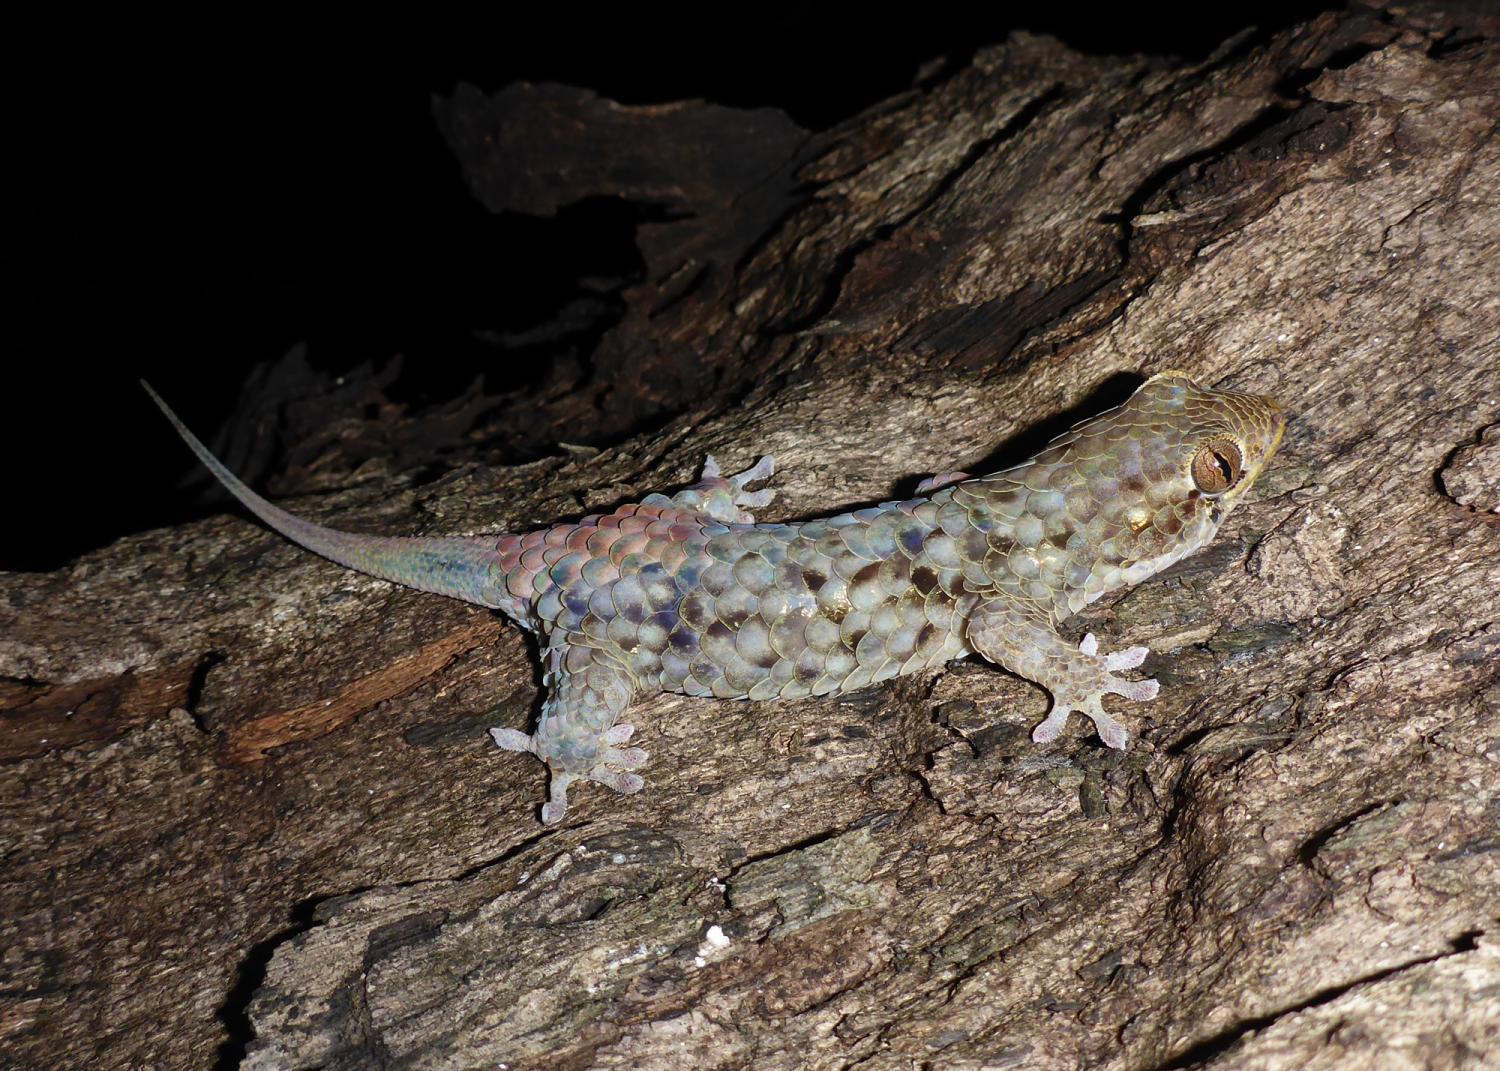 A new species of gecko with massive scales and tear-away skin